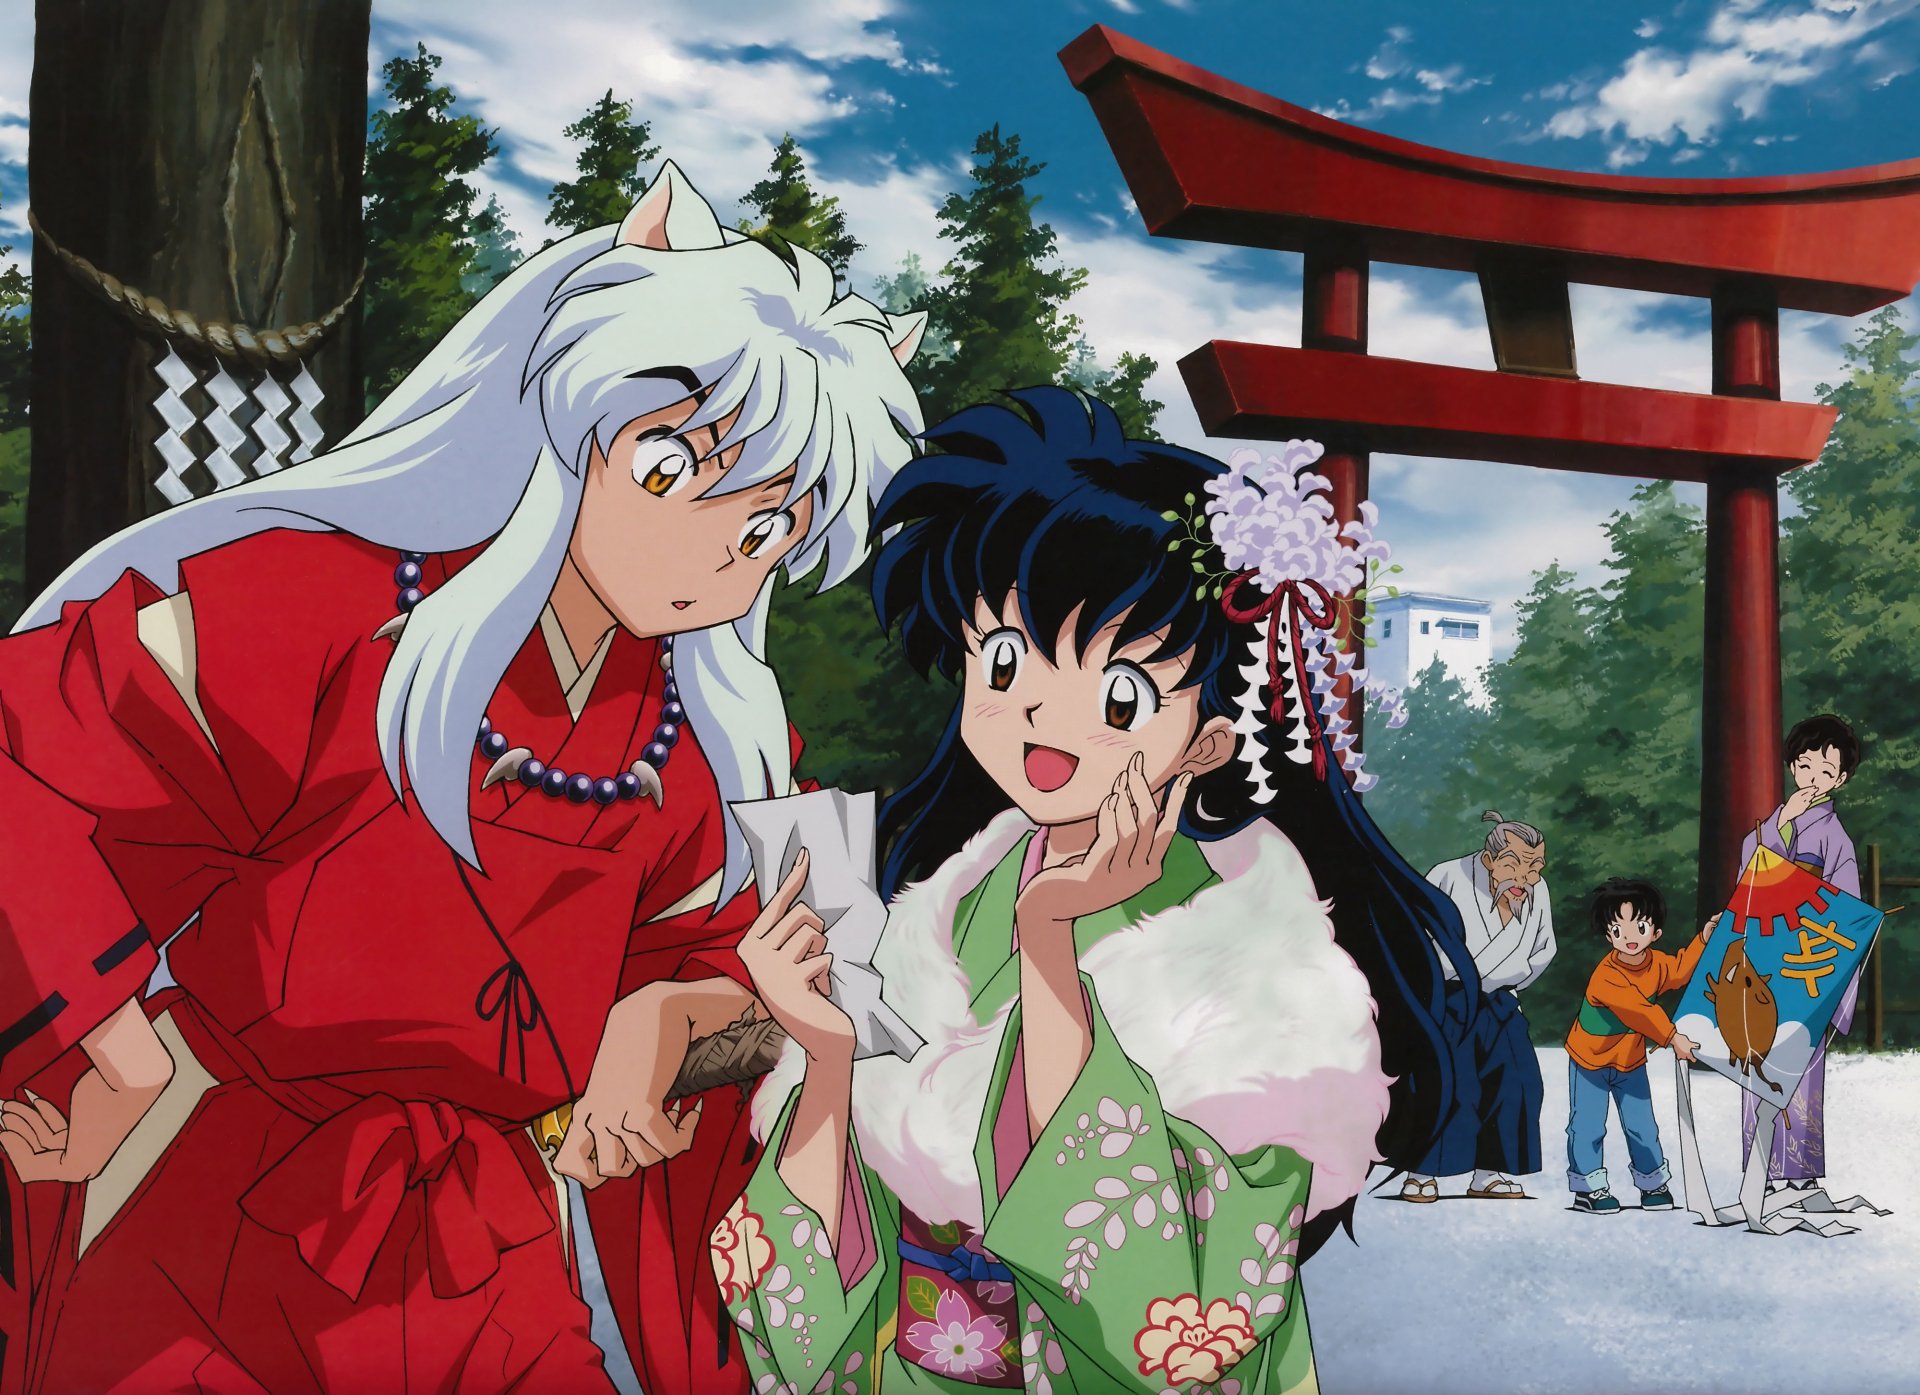 InuYasha 4k Ultra HD Wallpaper and Background Image | 4000x2906 | ID:227918